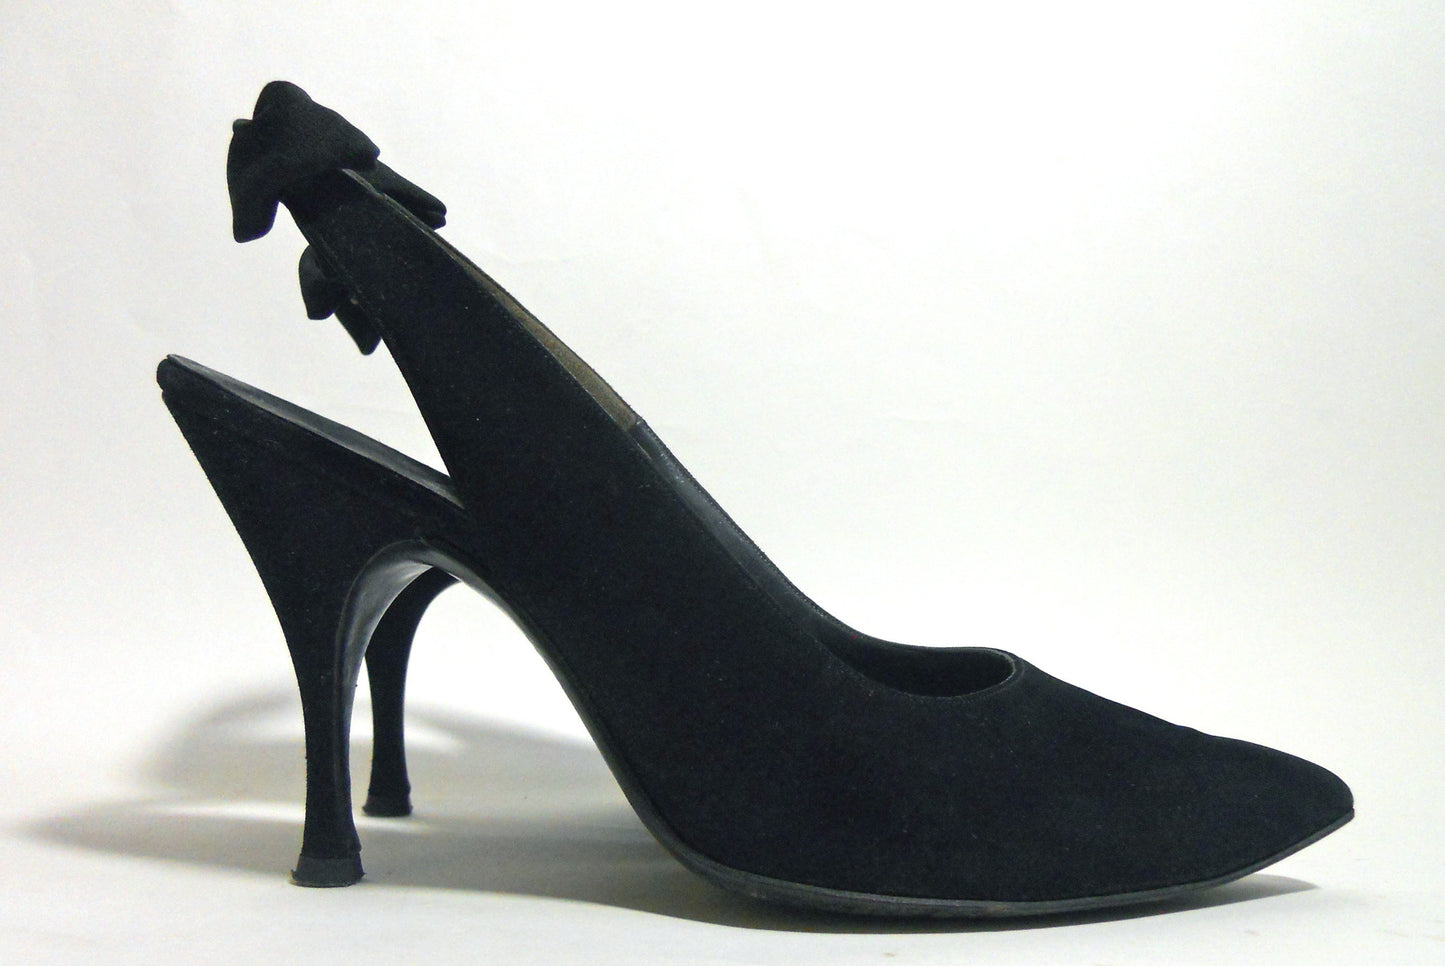 Black Suede Stiletto Heel Slingback Shoes with Bows circa 1960s by Herbert Levine